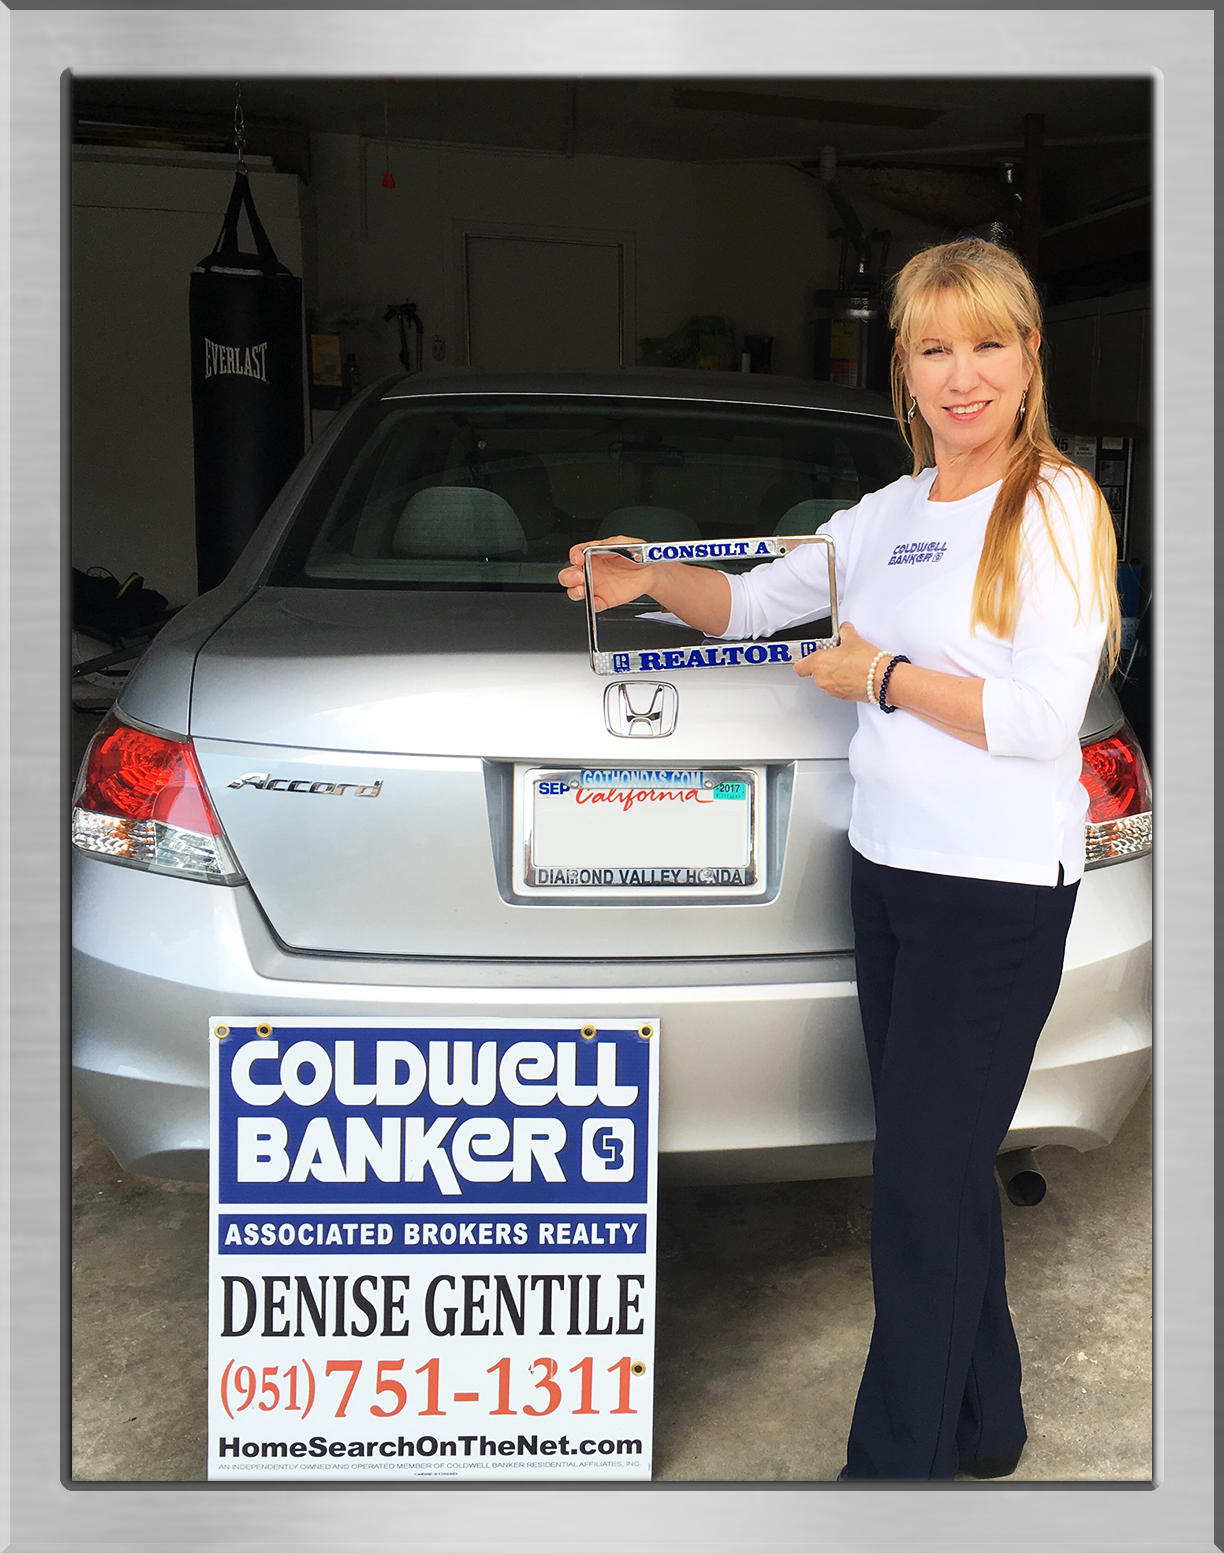 It's time to consult a Realtor if you're Thinking of Buying or Selling.  Coldwell Banker, and I would welcome the opportunity to assist you with your next Real Estate move!  Call today for a free consultation.  951-751-1311.  Looking forward to your call.